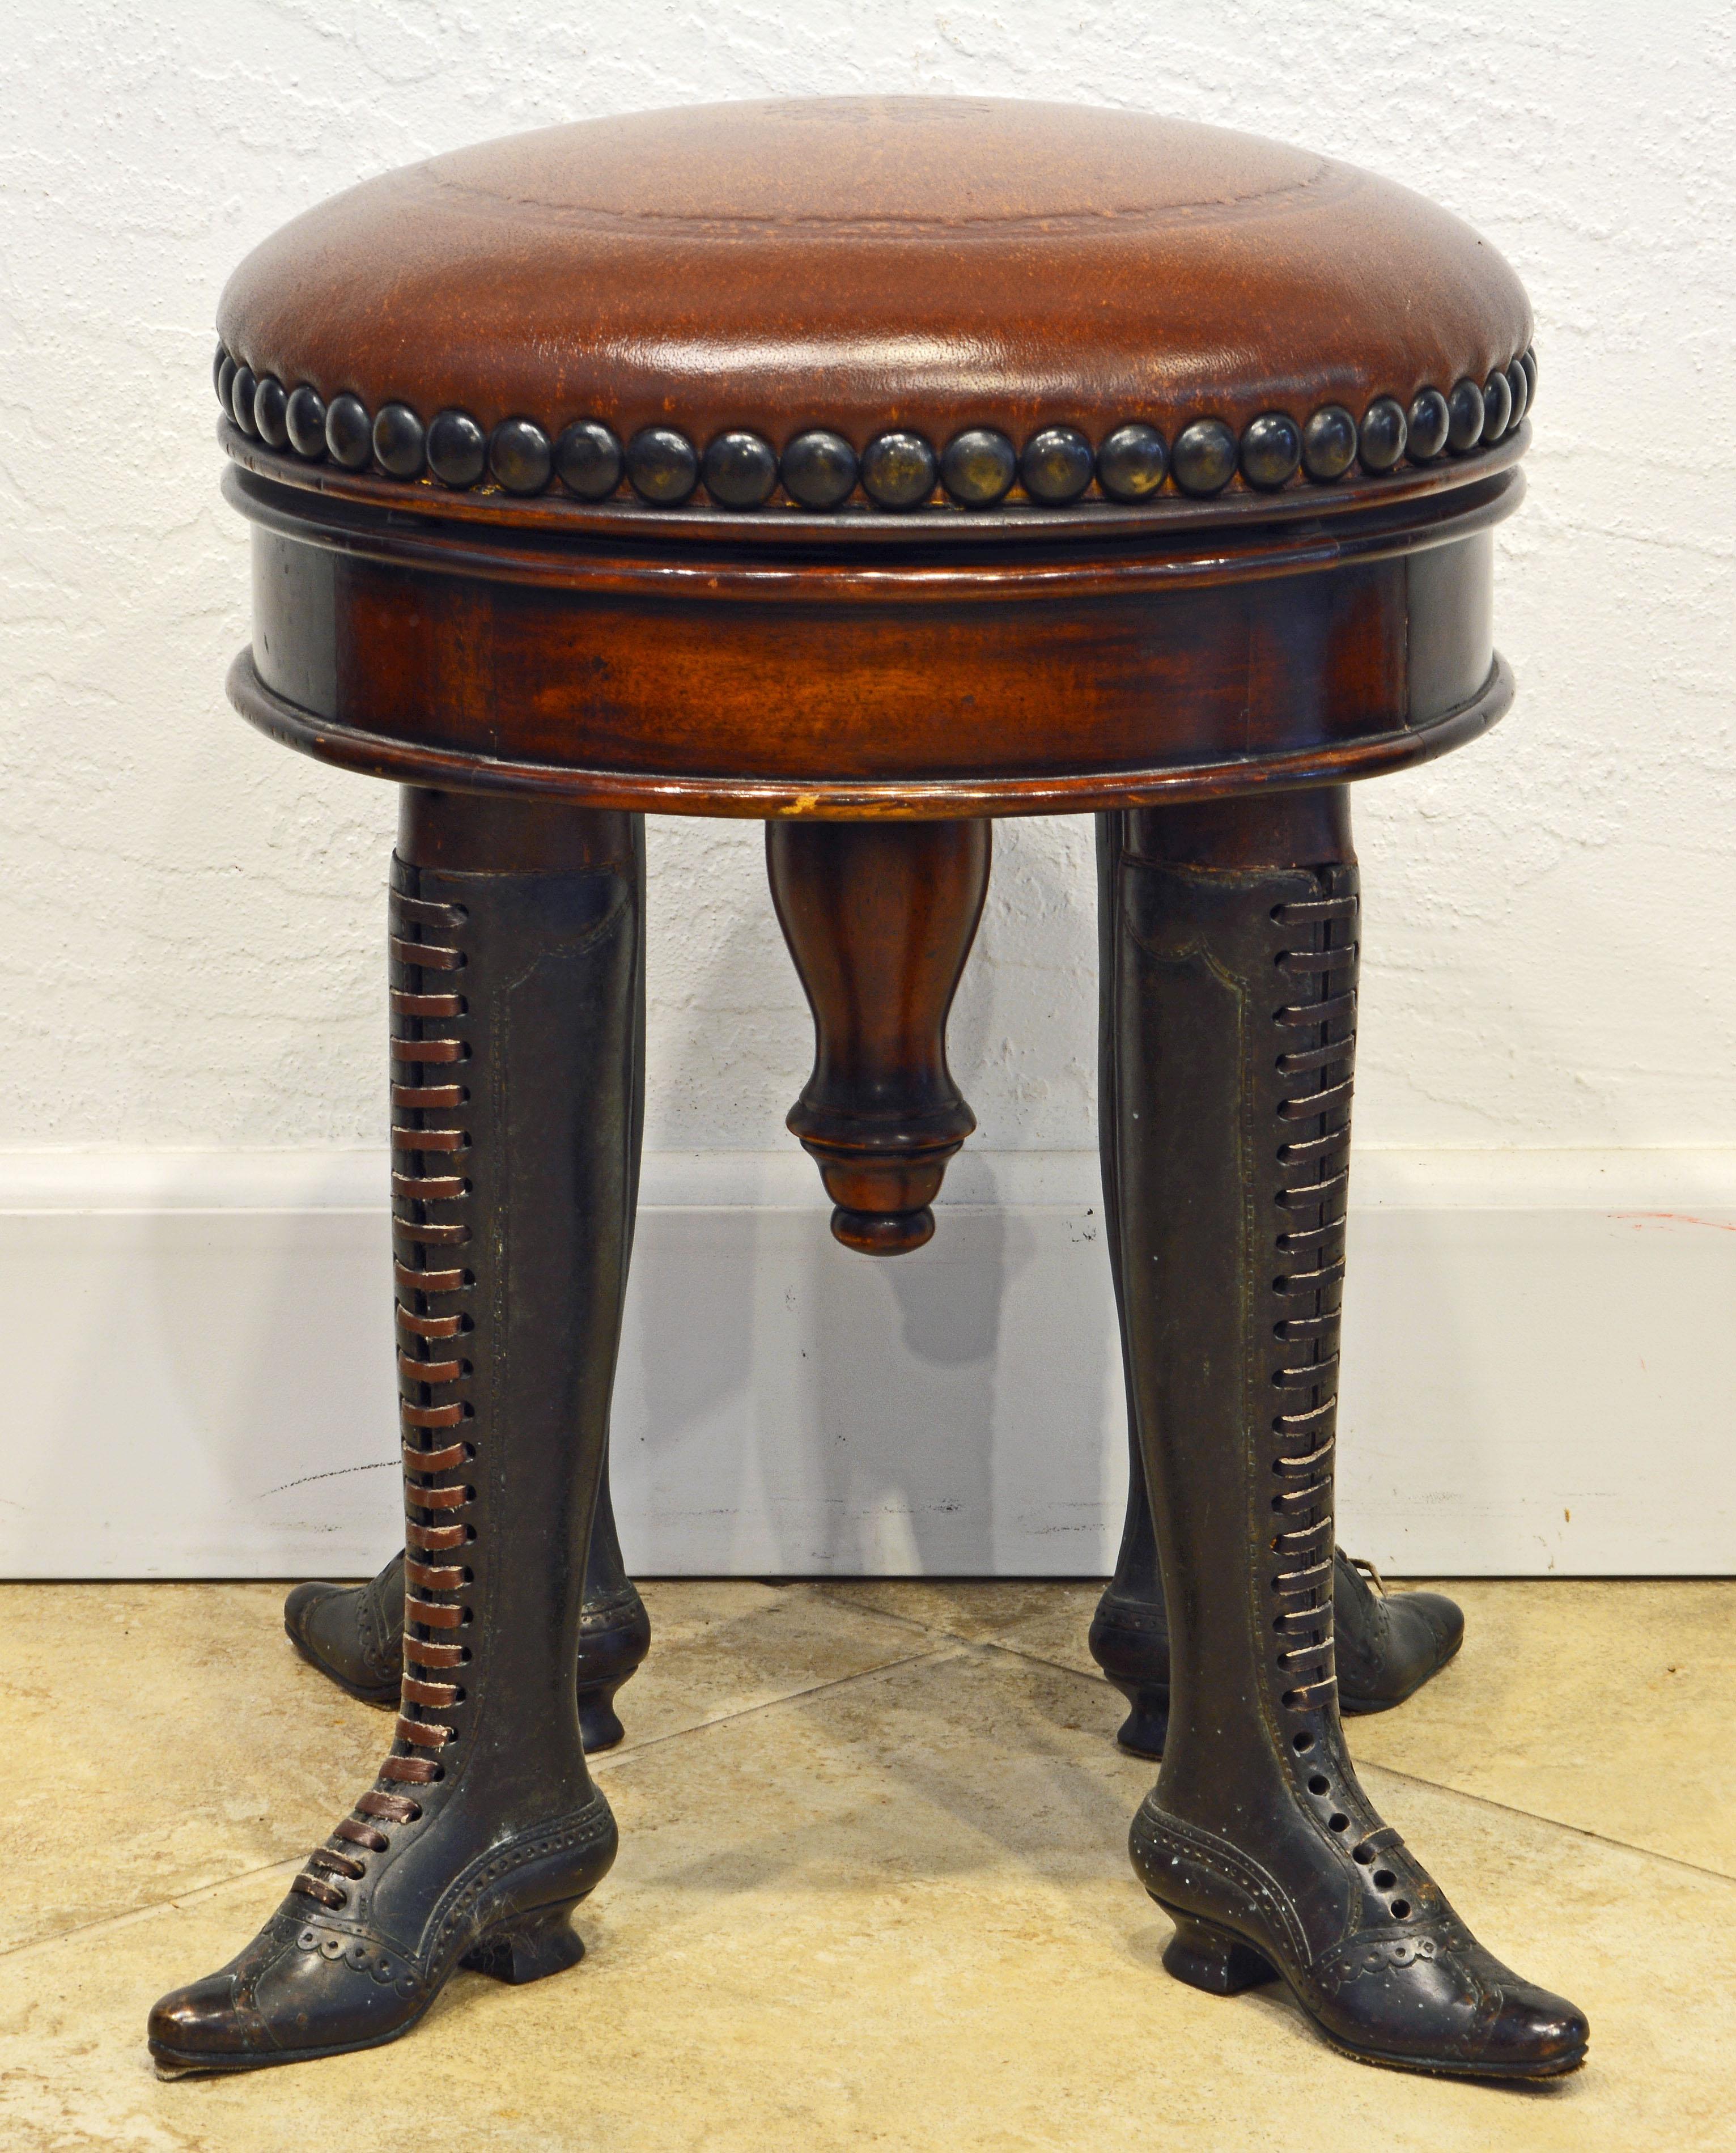 This very unusual piano stool or bench combines a height adjustable upholstered leather seat with mahogany frame and four bronze legs created in the shape of ladies boots mounted with leather laces. The bronze work is finely detalied simulating real